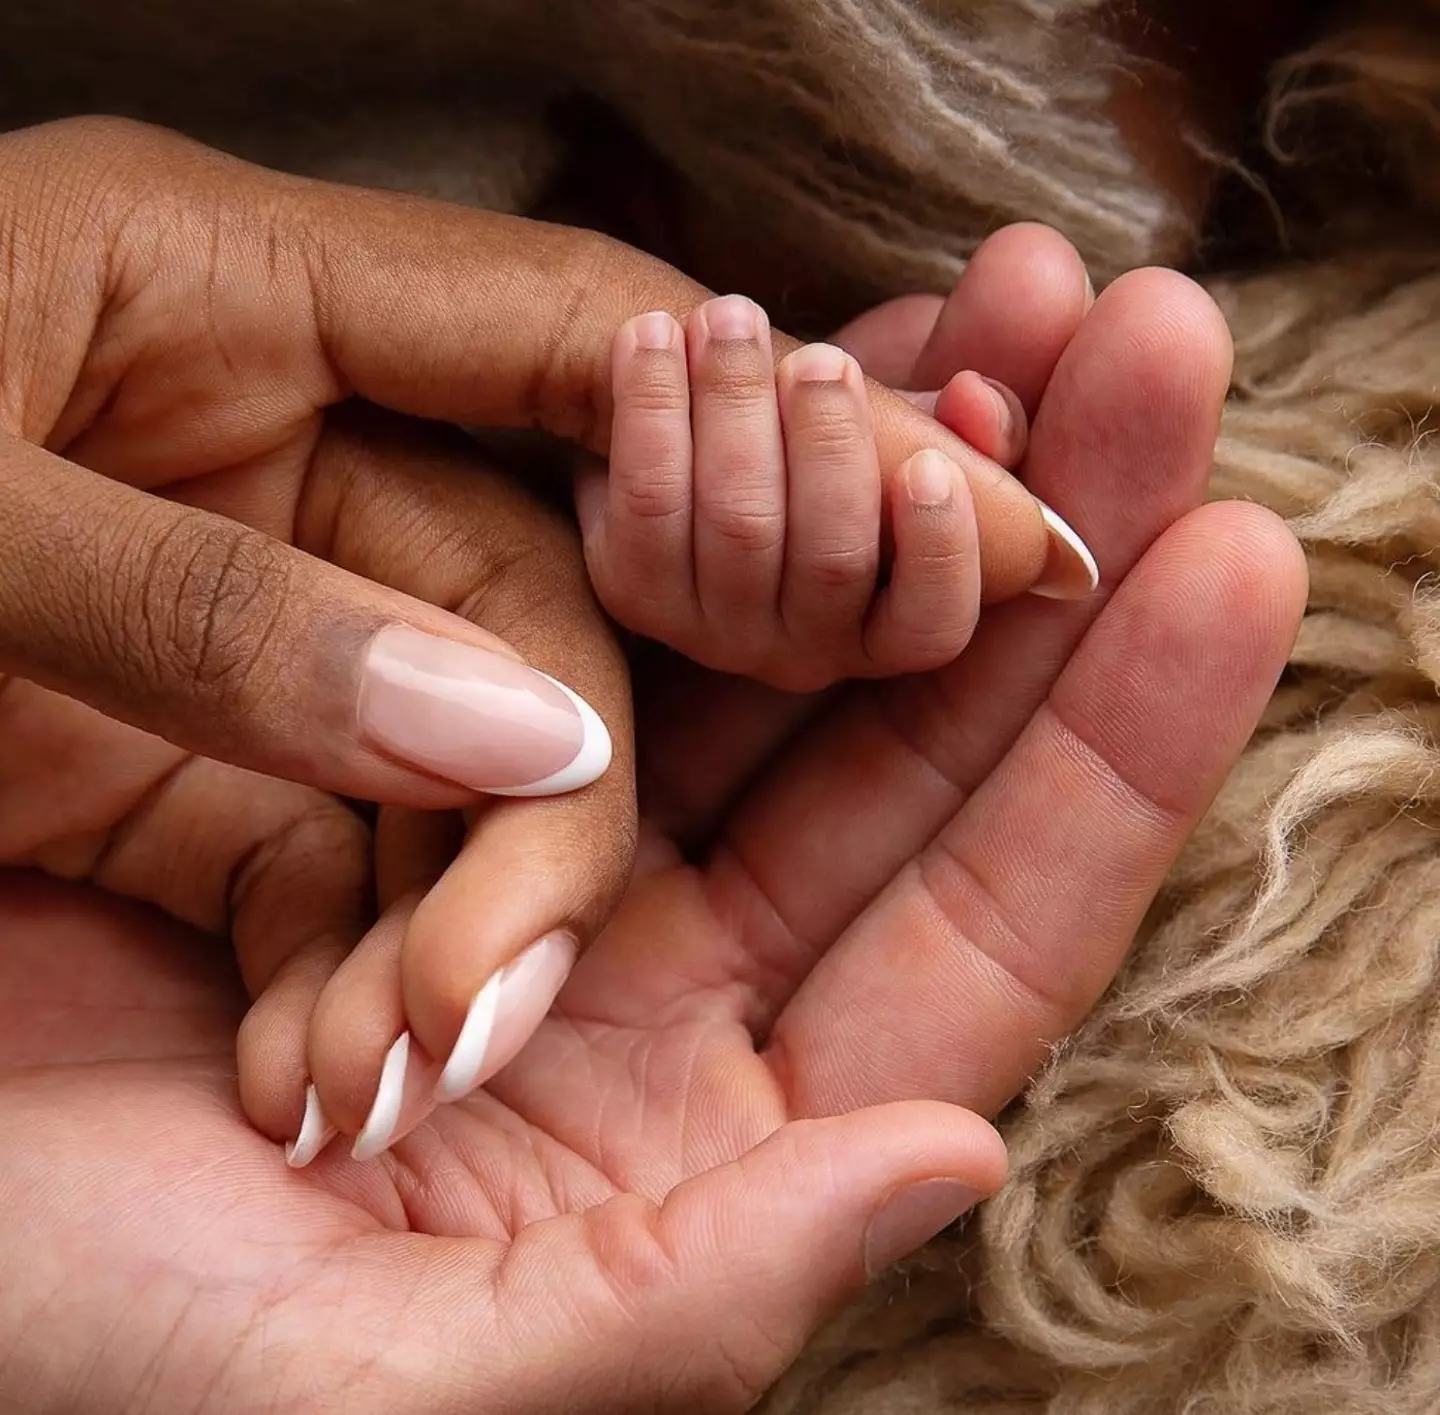 Alexandra Burke has welcomed her second child into the world.